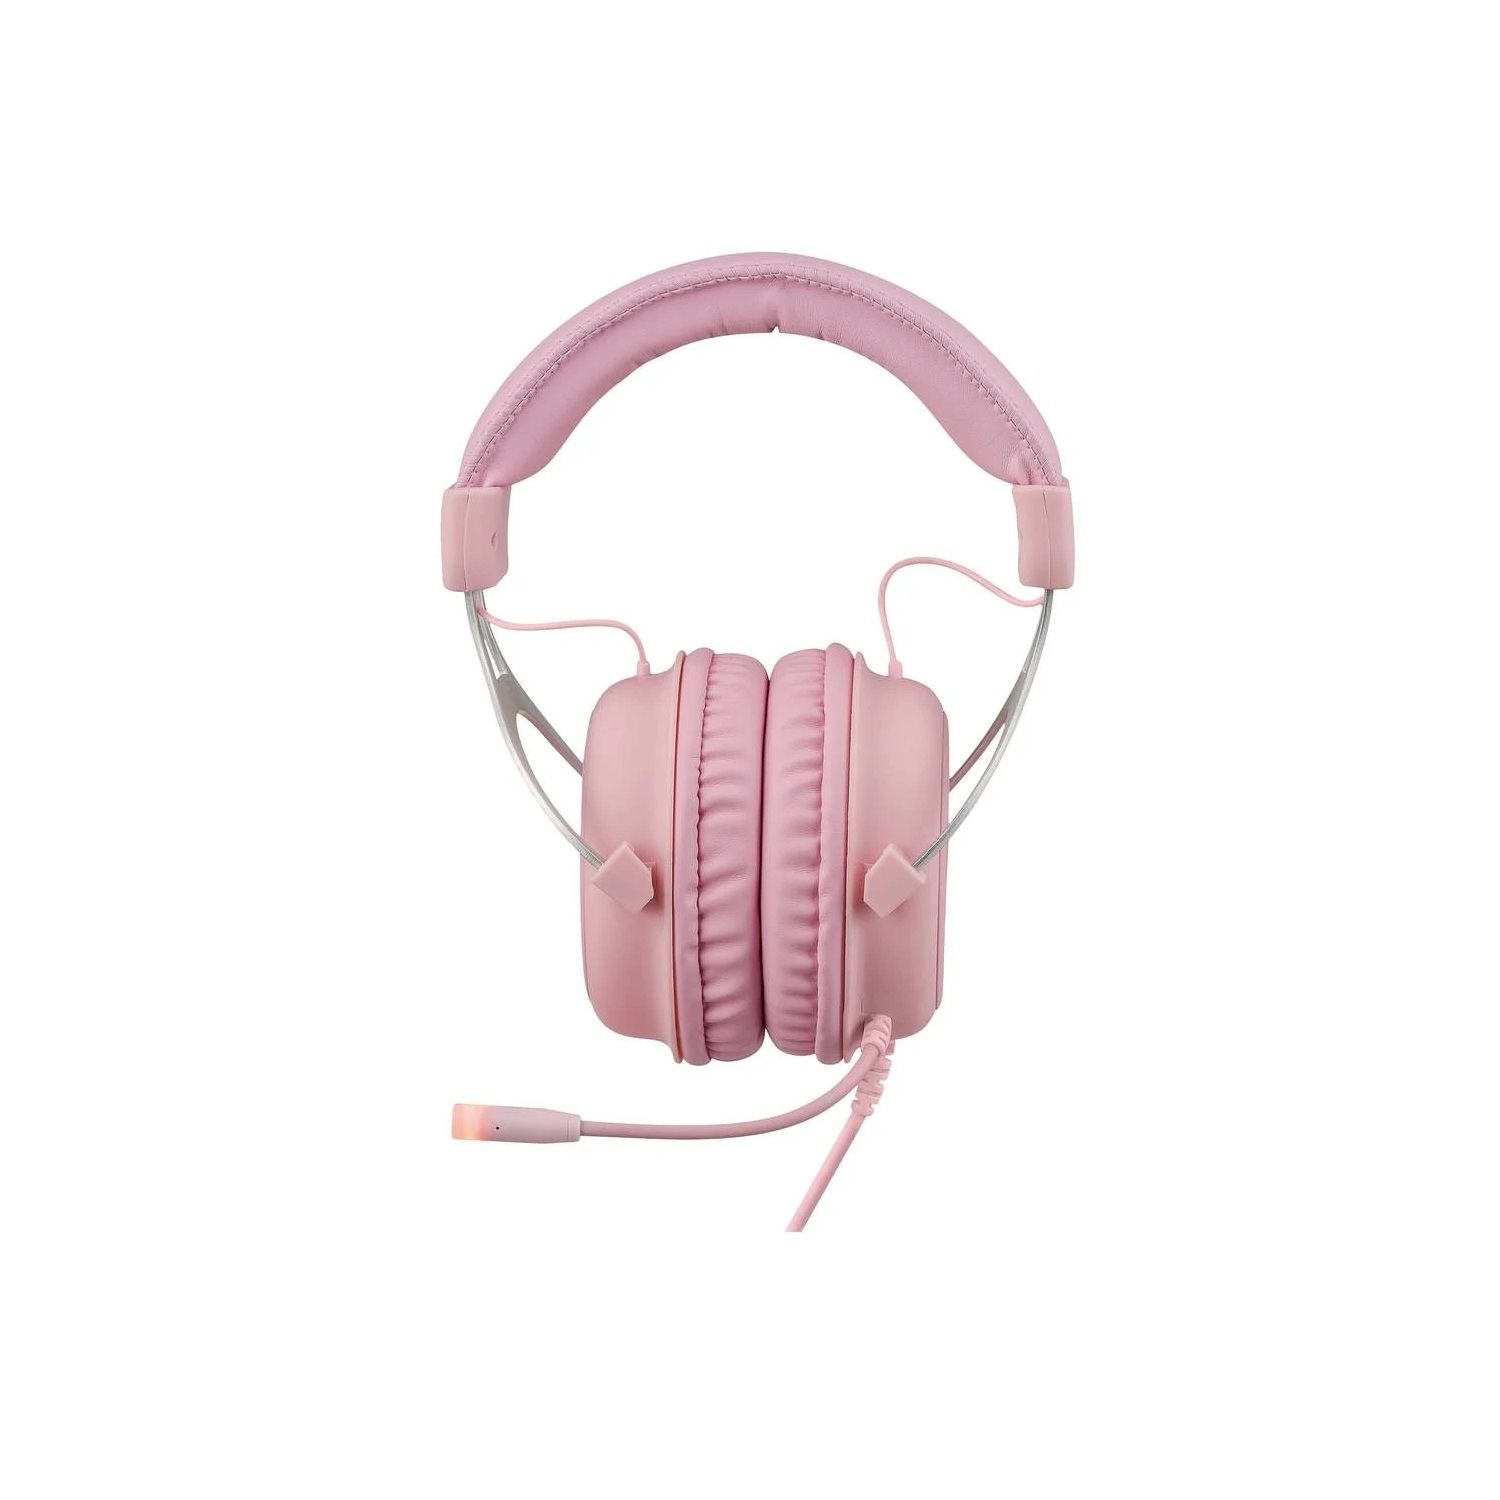 Gamer mit pink Headset Headset GAMING Over-ear LED-Beleuchtung, DELTACO